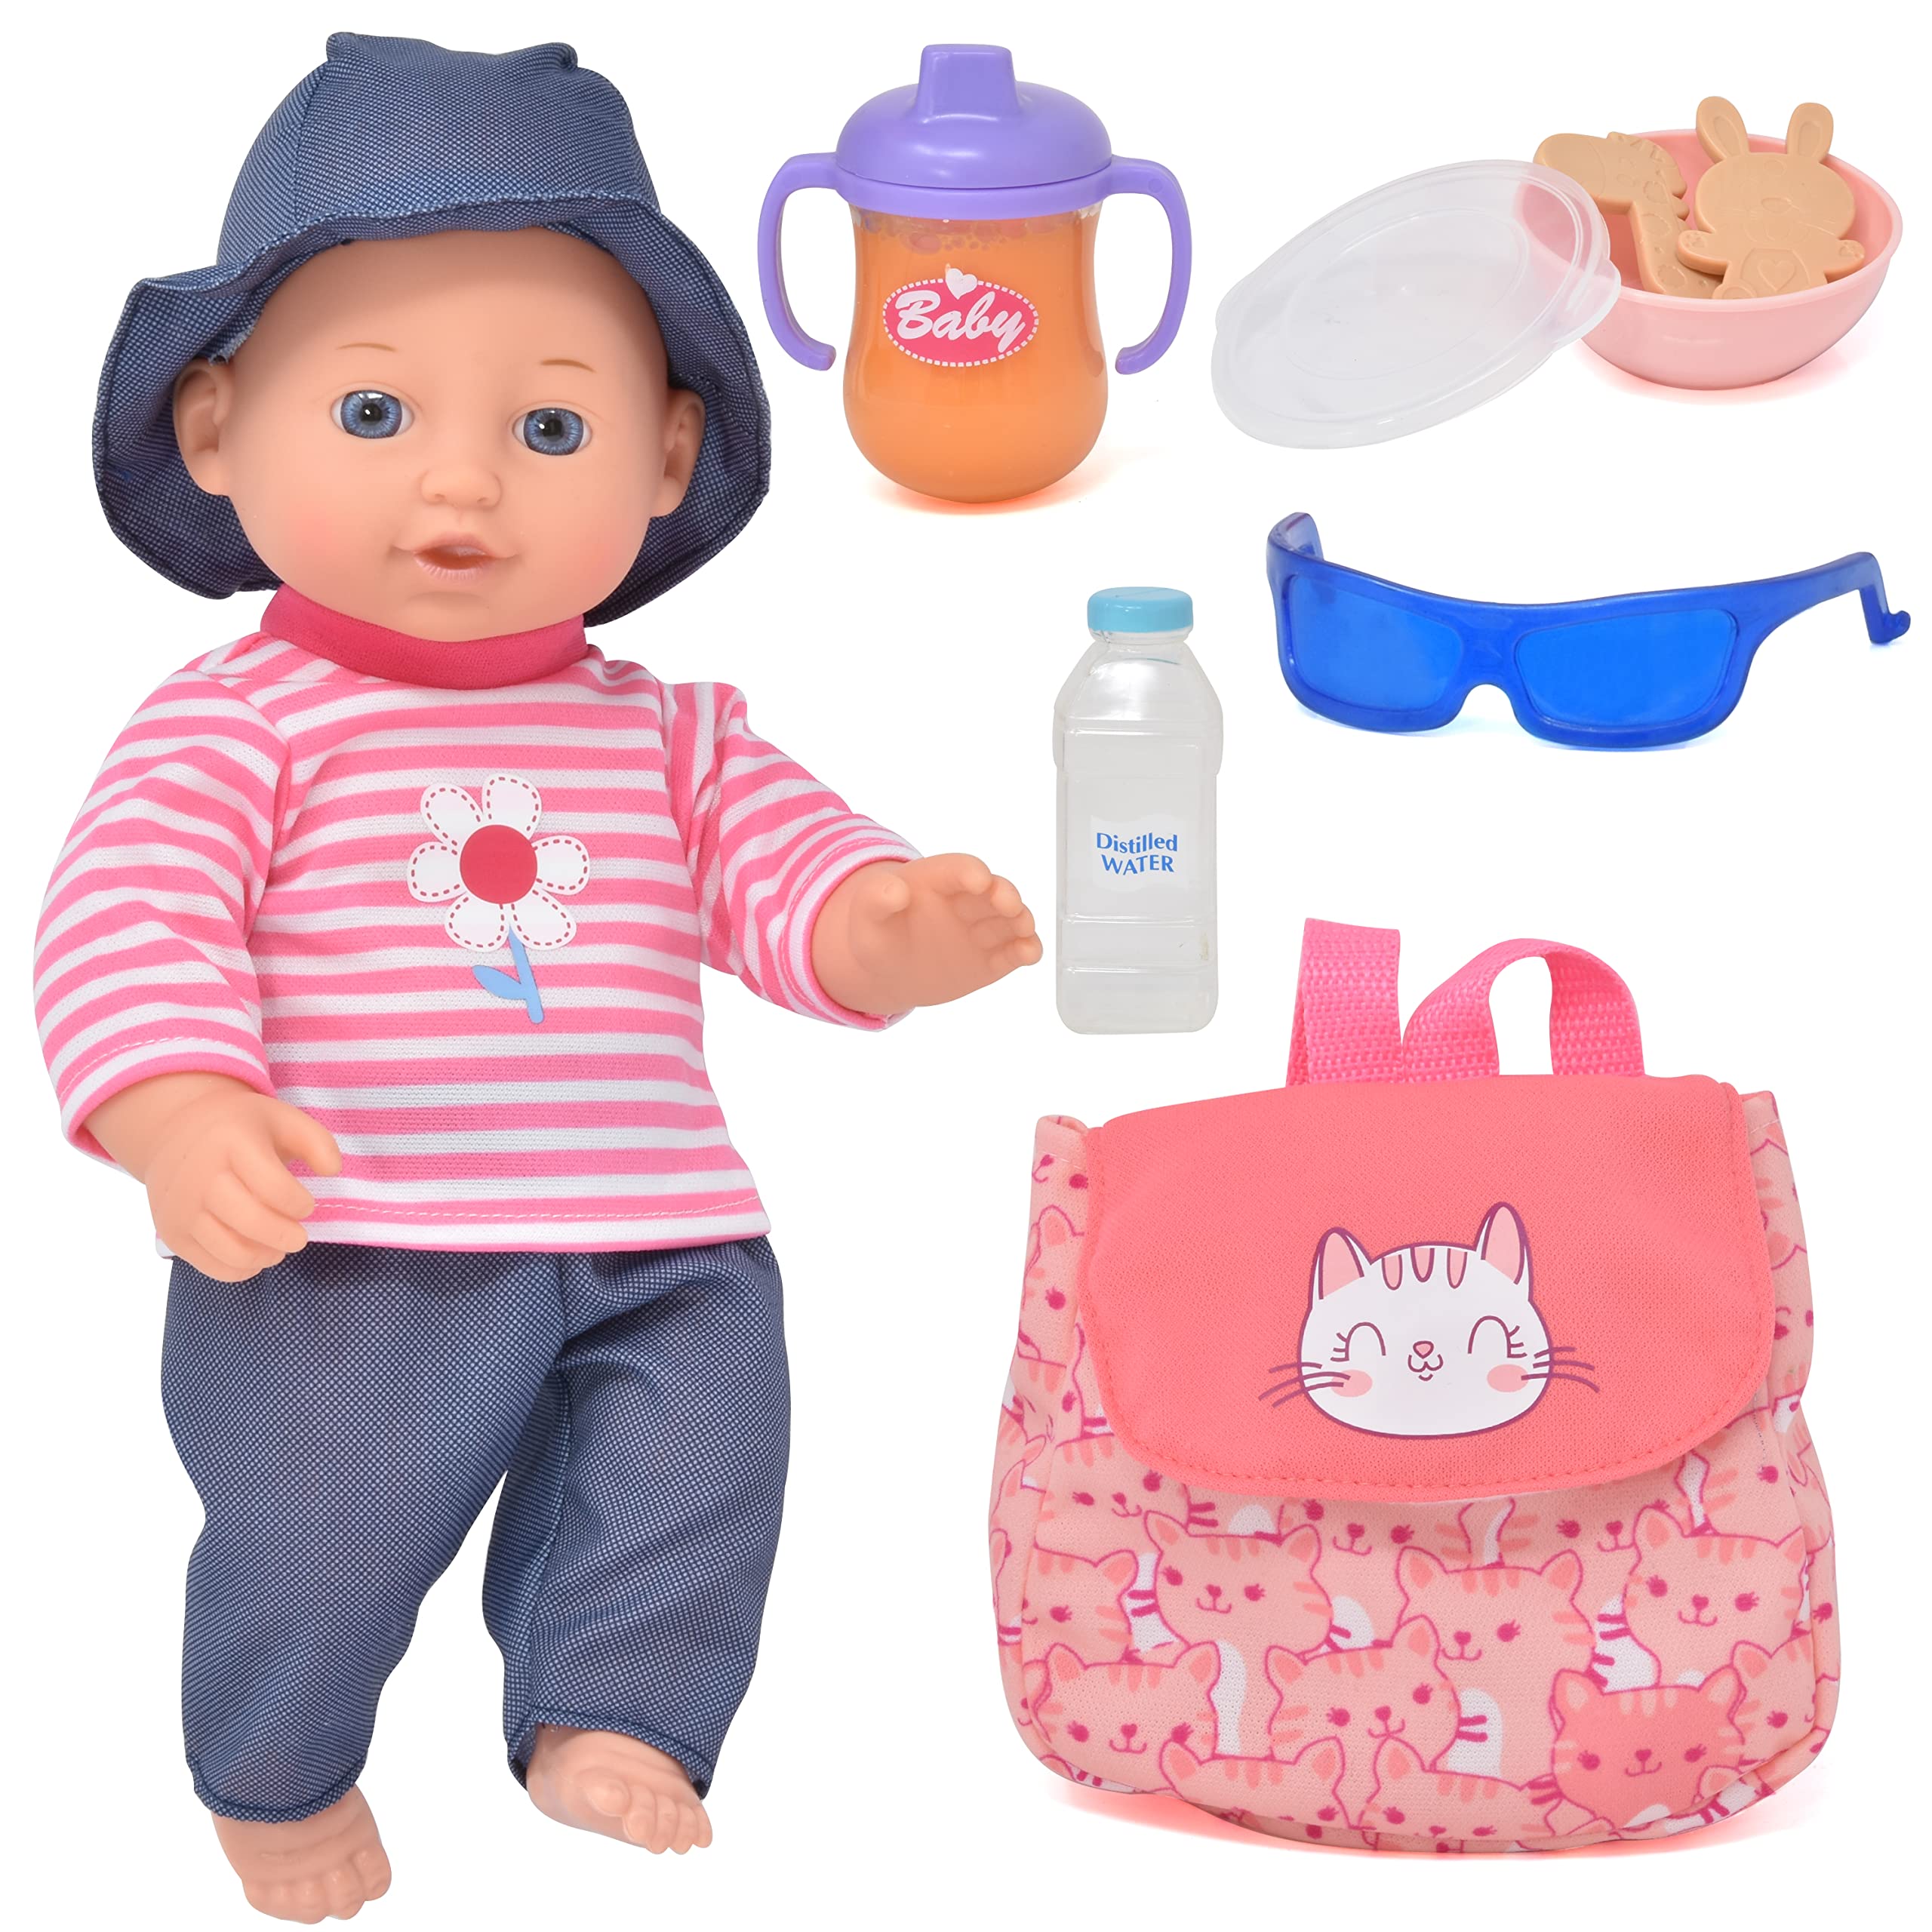 Baby Doll with Accessories 12 Inch Baby Doll for Toddlers Feeding Set with Realistic Diaper Bag, Bottles, Sunglasses, and Pretend Play Feeding Accessories for 2 Years and Up